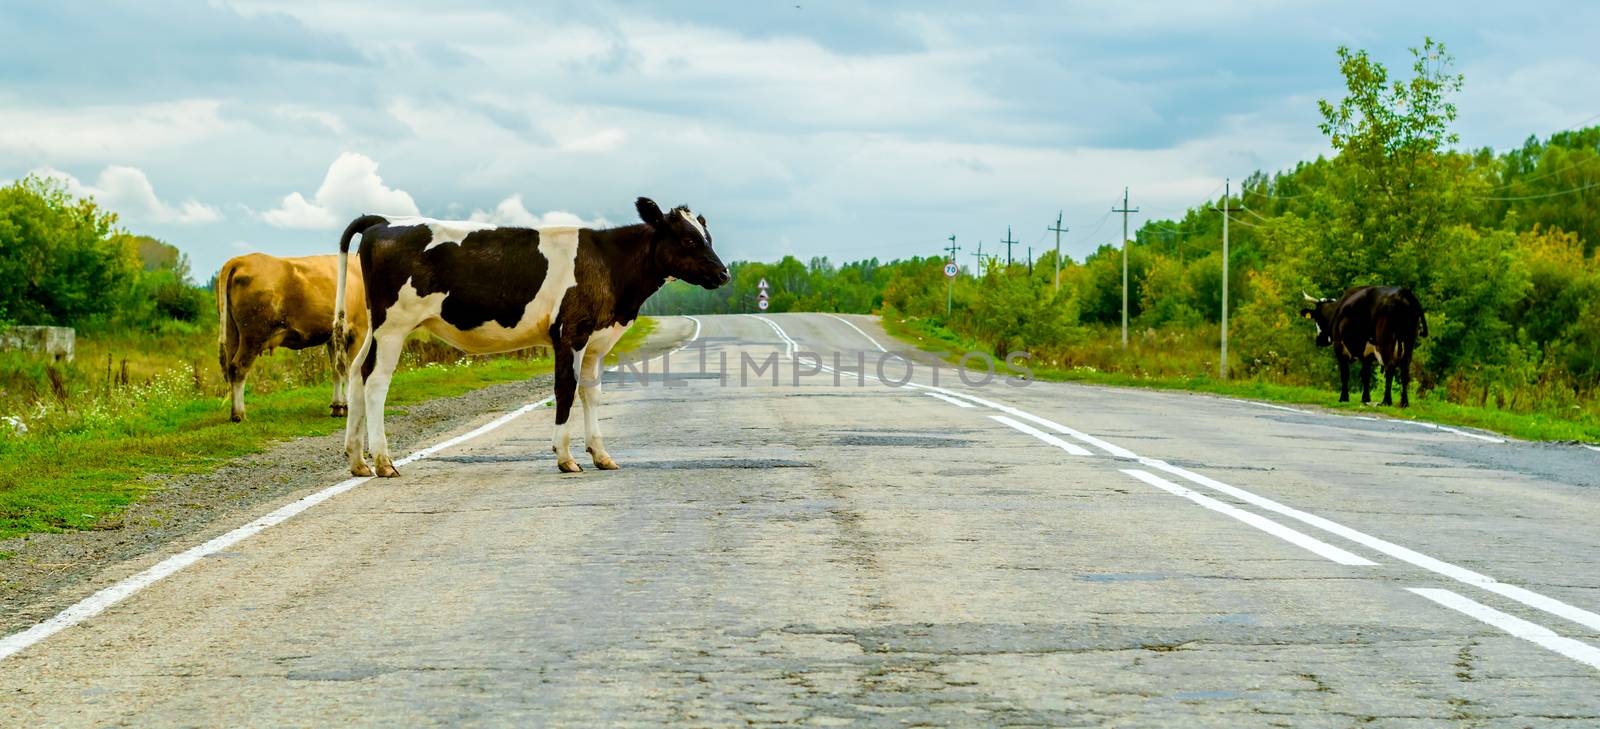 cows crossing the road, danger to cars by jk3030